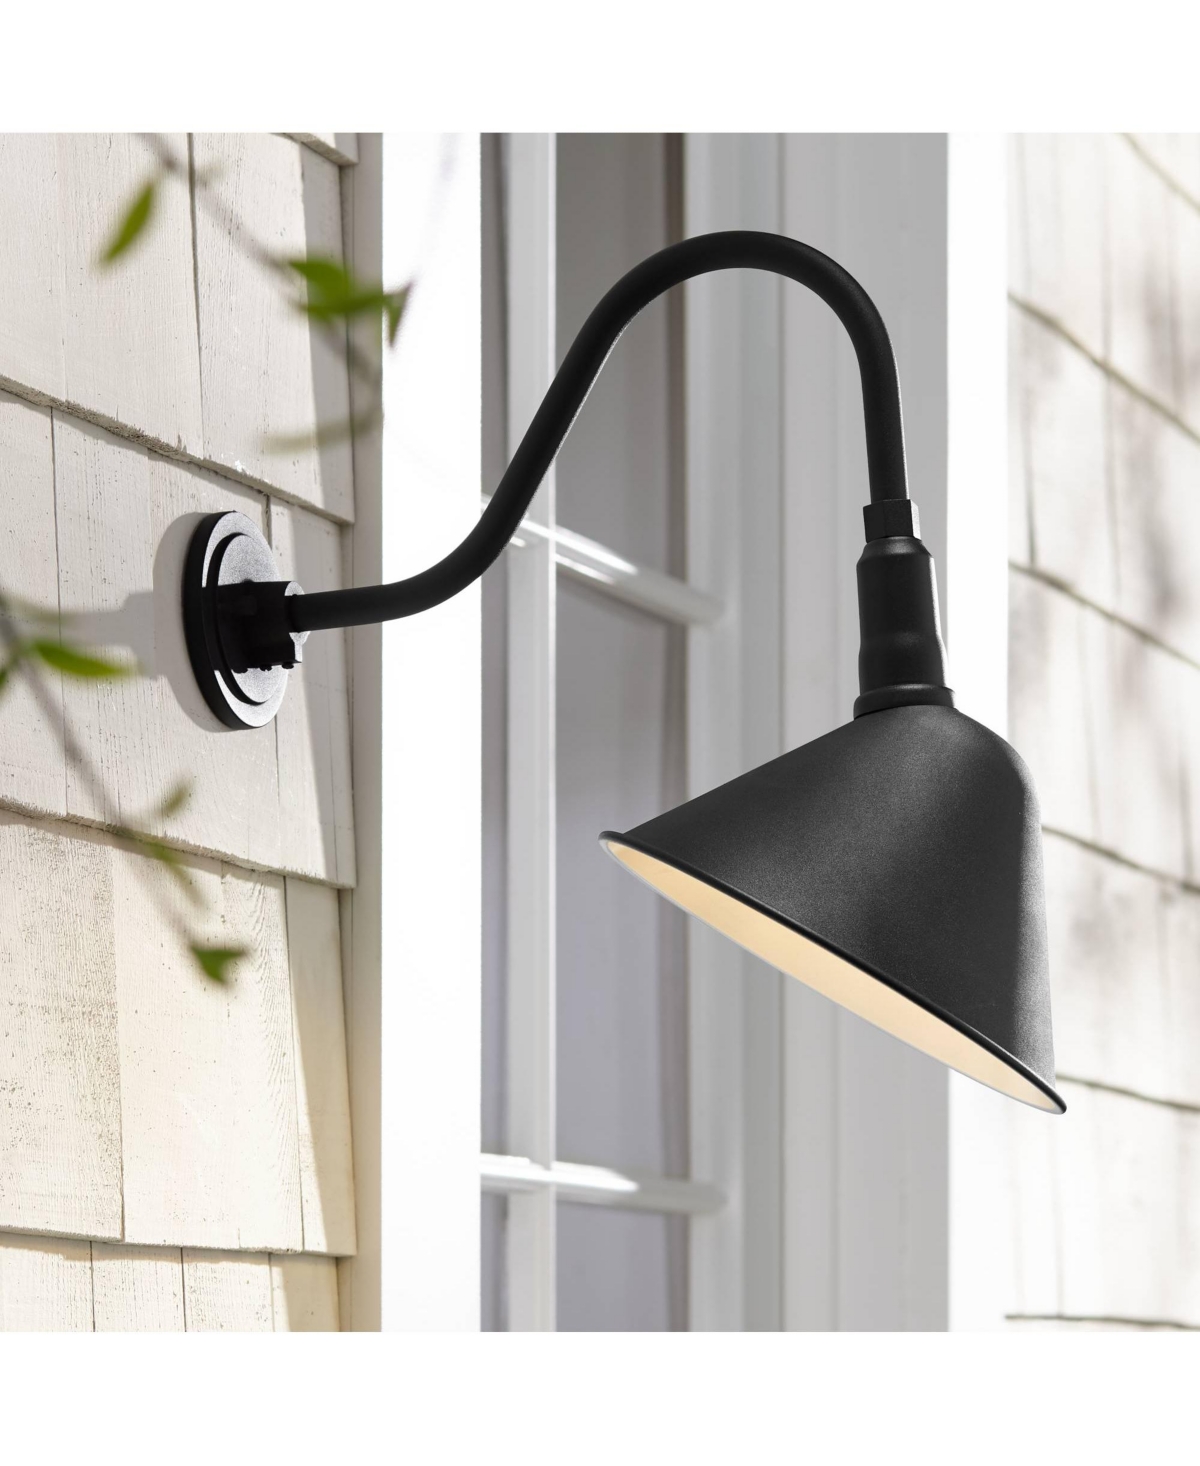 Neihart Rustic Industrial Outdoor Barn Wall Light Fixture Black Metal 18" Curving Gooseneck Arm Rlm for Exterior House Porch Patio Outside Deck Garage